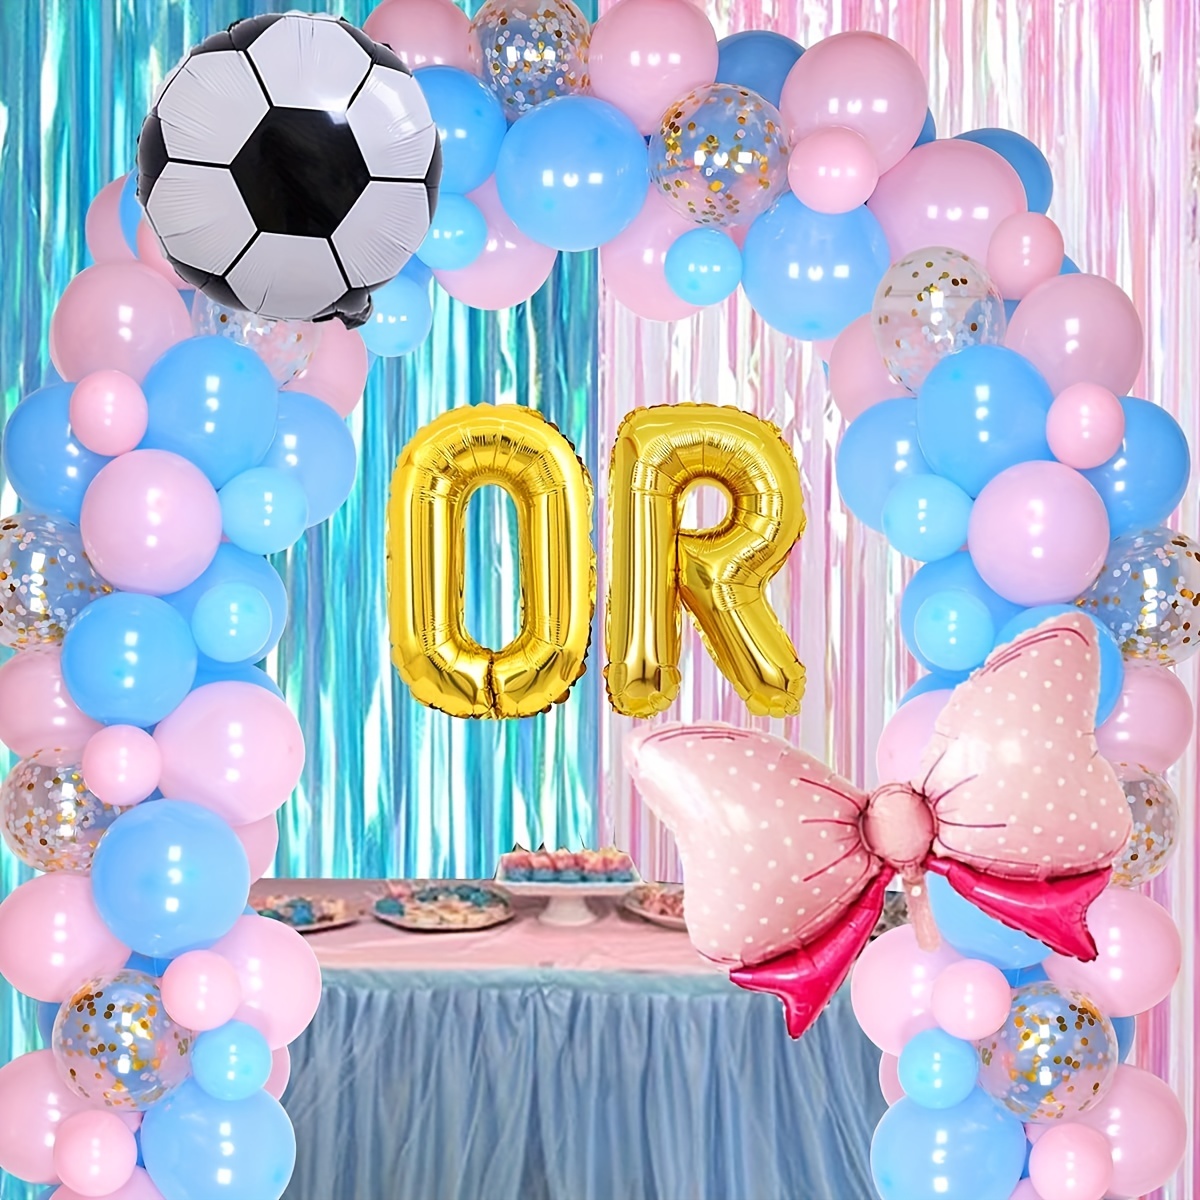 Gender Reveal Kit, Gender Reveal Party Supplies, Gender Reveal Decorations,  Blue and Pink Balloons Arch & Garland Kit, Metallic Fringe Curtains Party